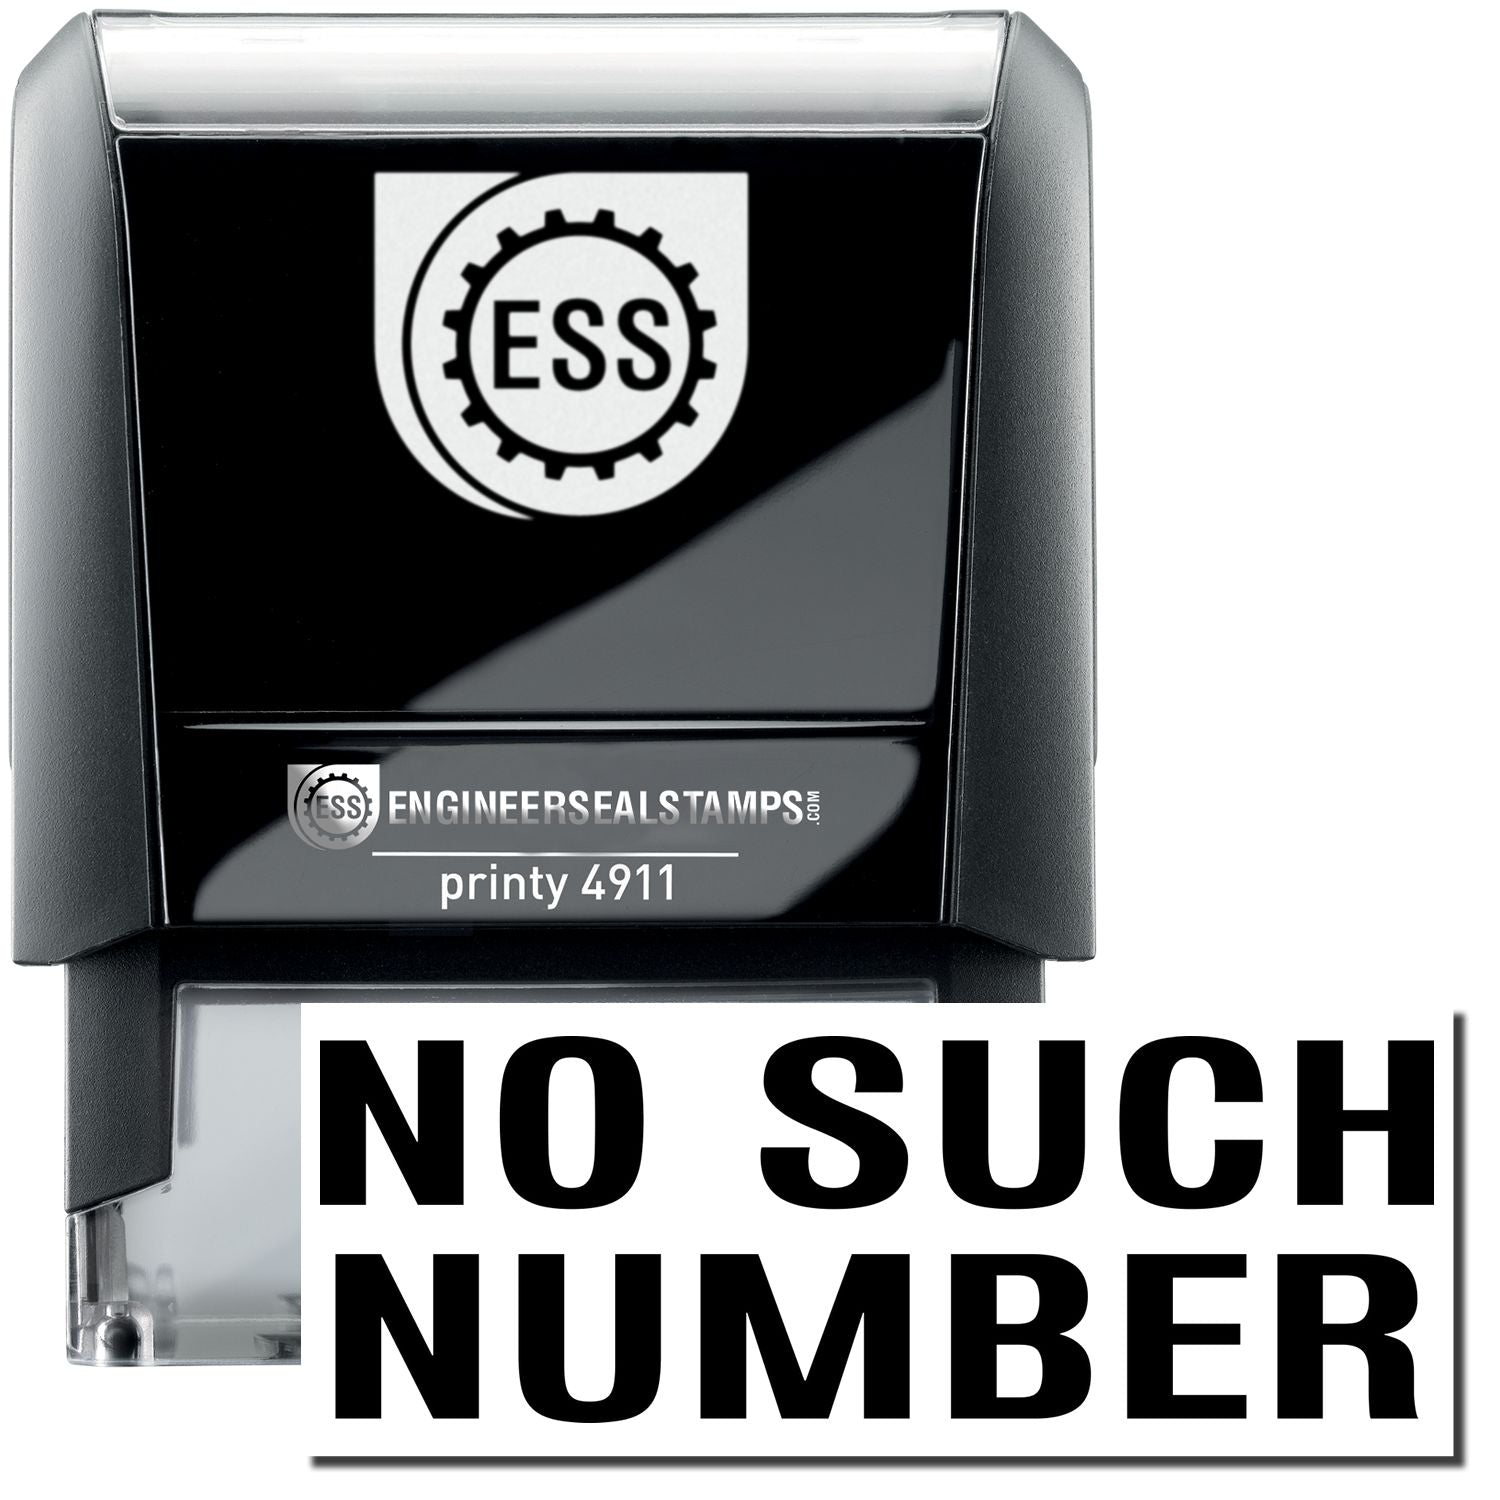 A self-inking stamp with a stamped image showing how the text "NO SUCH NUMBER" is displayed after stamping.